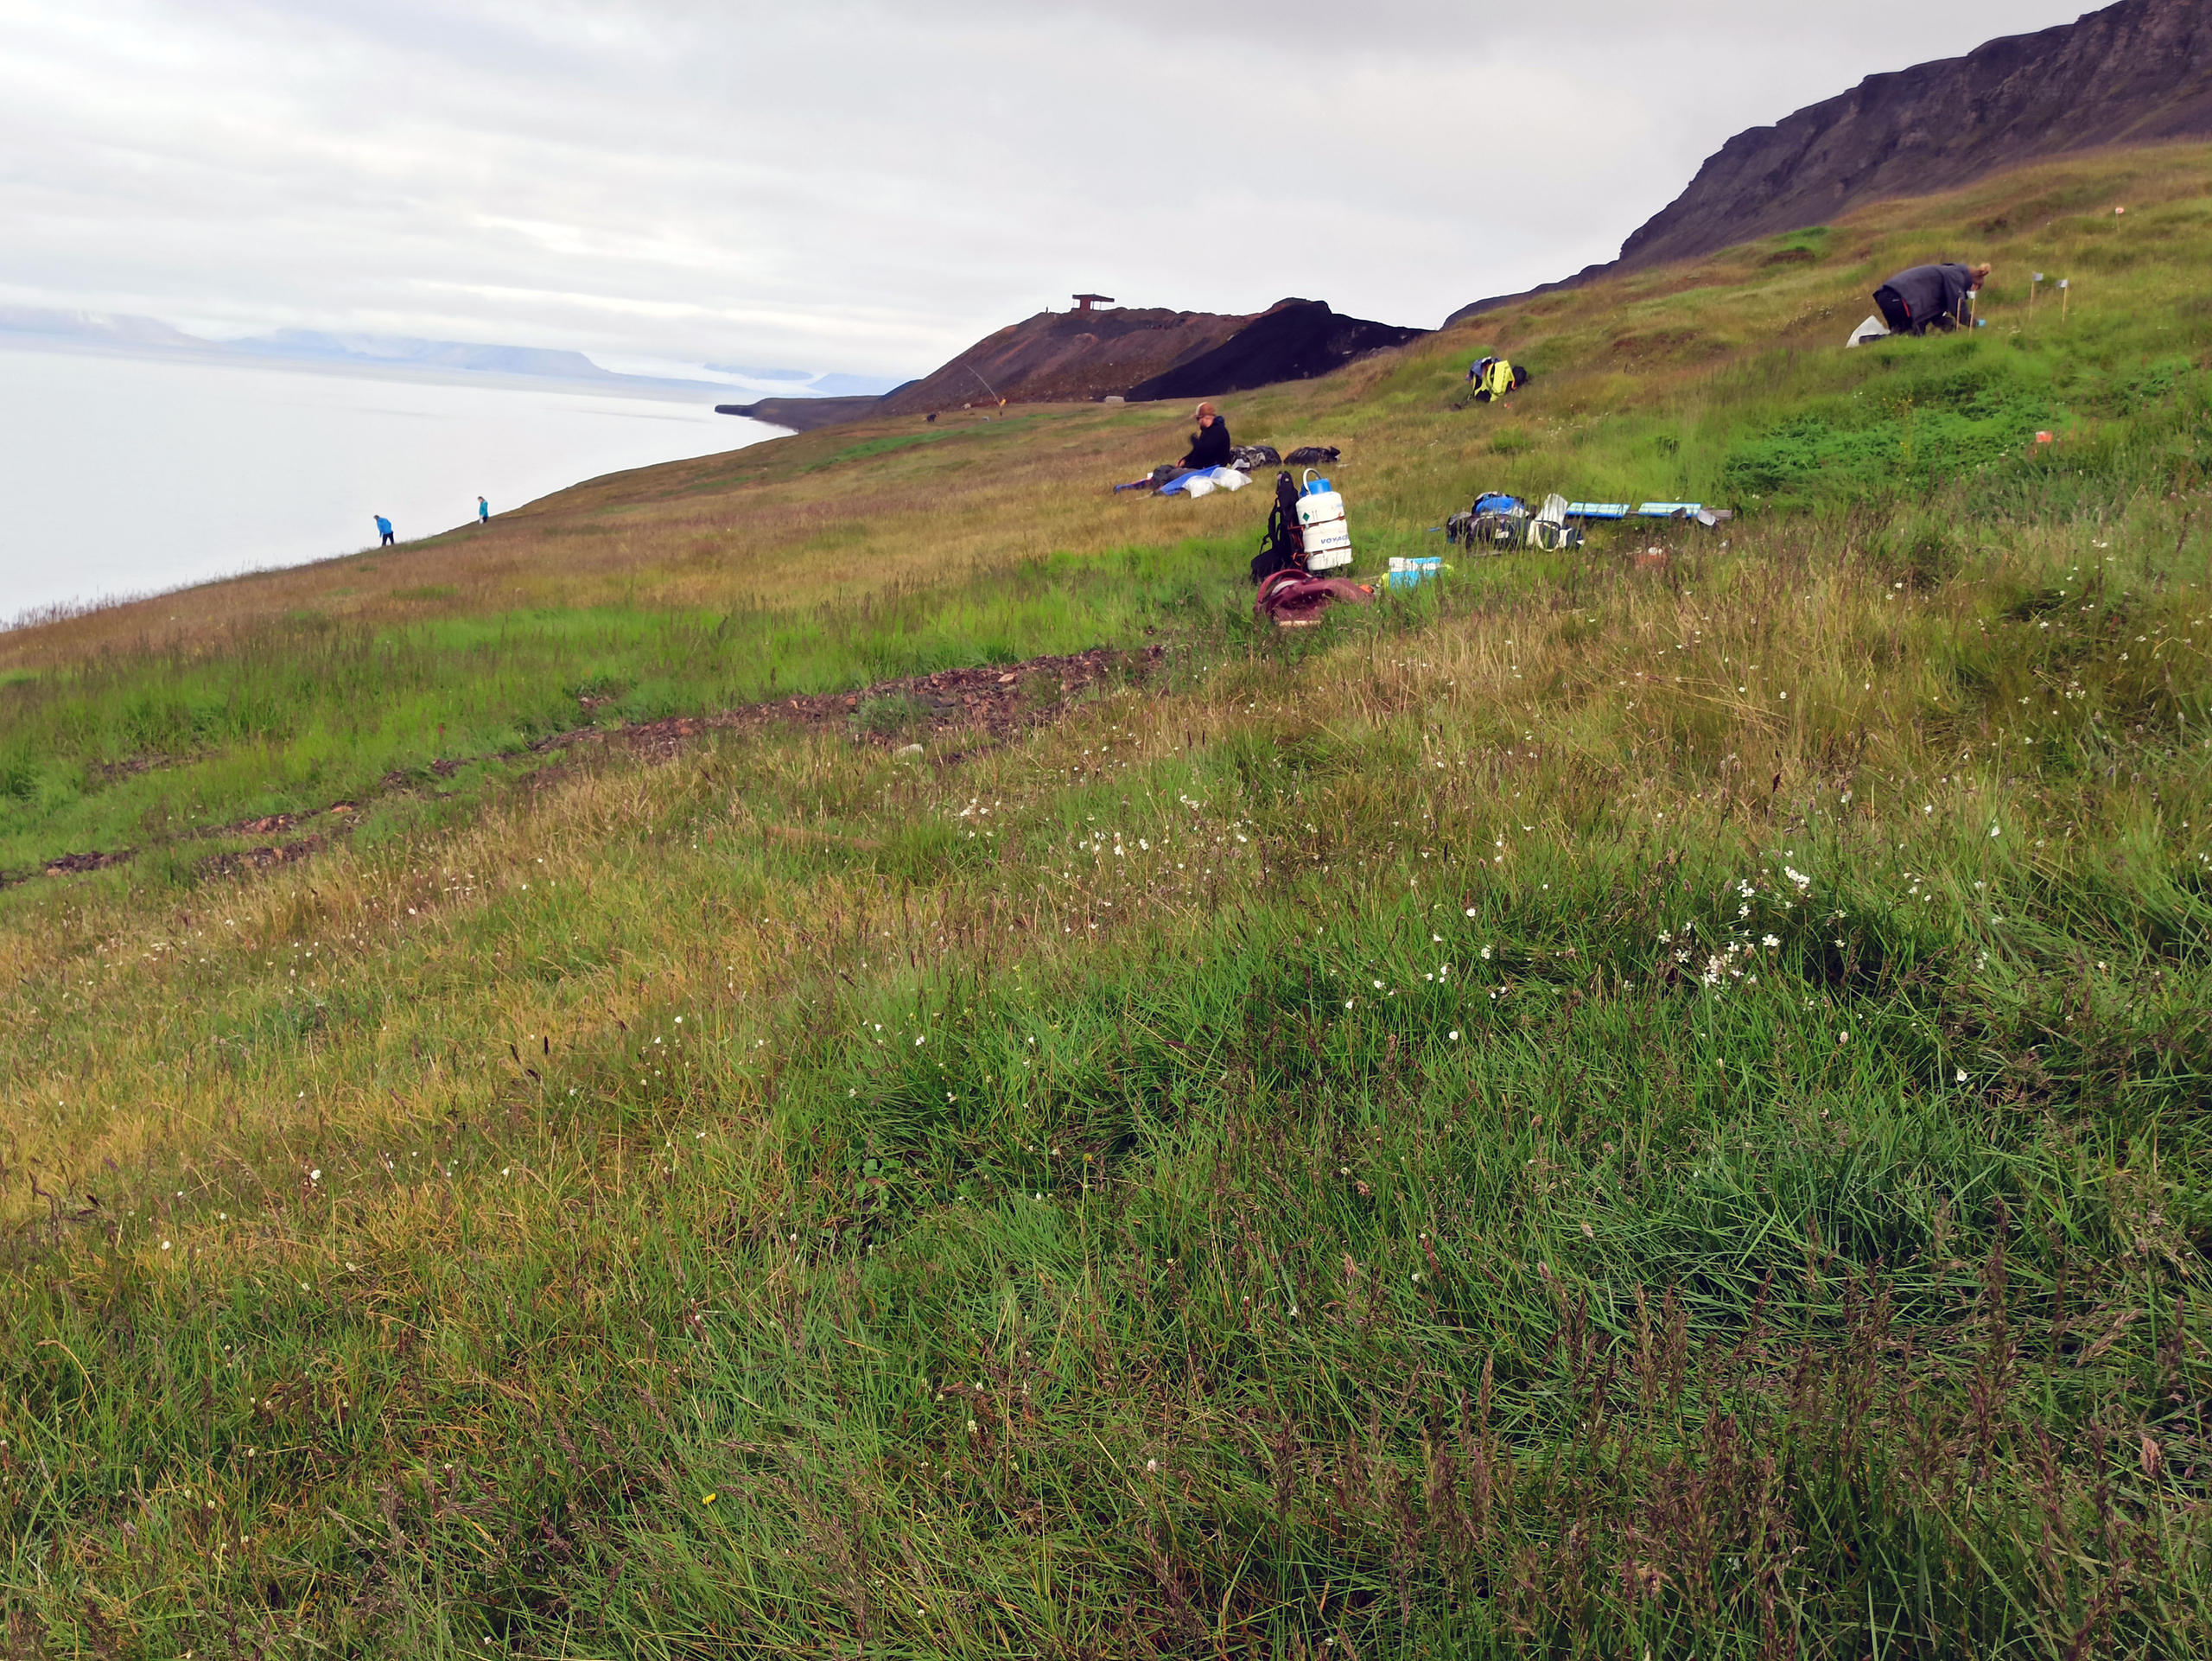 Our team working on different tasks on the sampling site in Barentsburg.